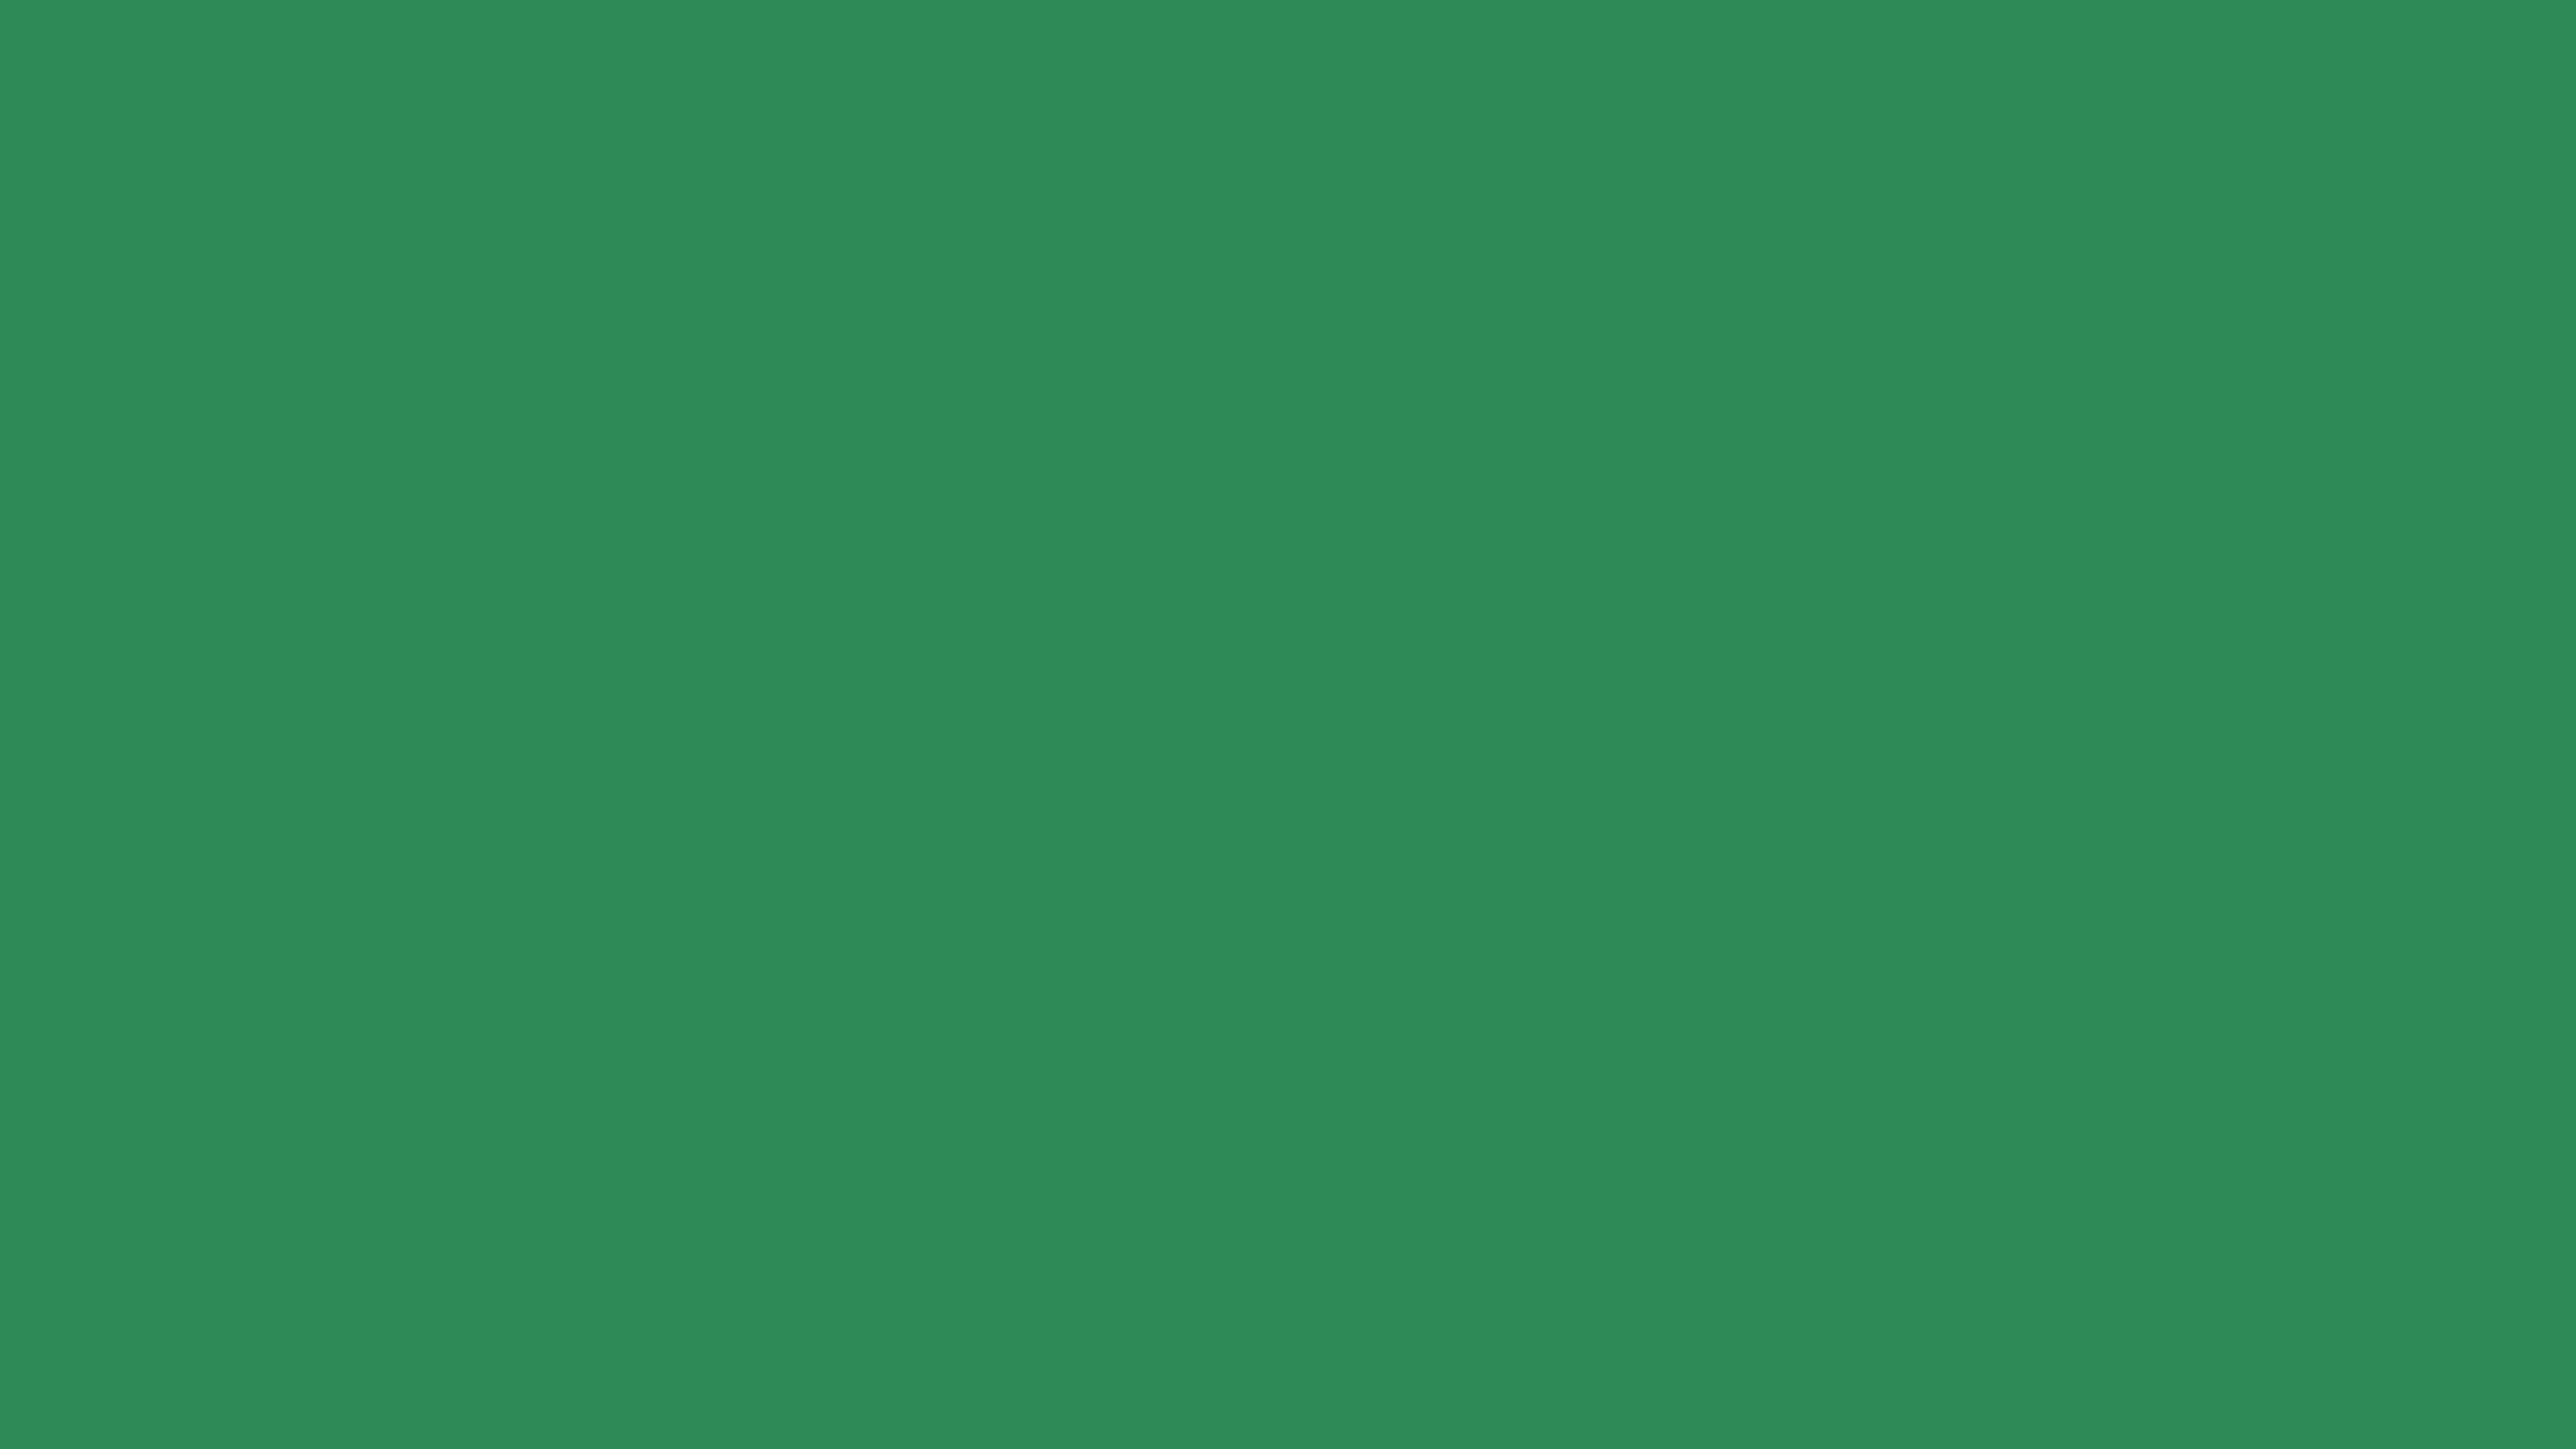 3840x2160 Sea Green Solid Color Background